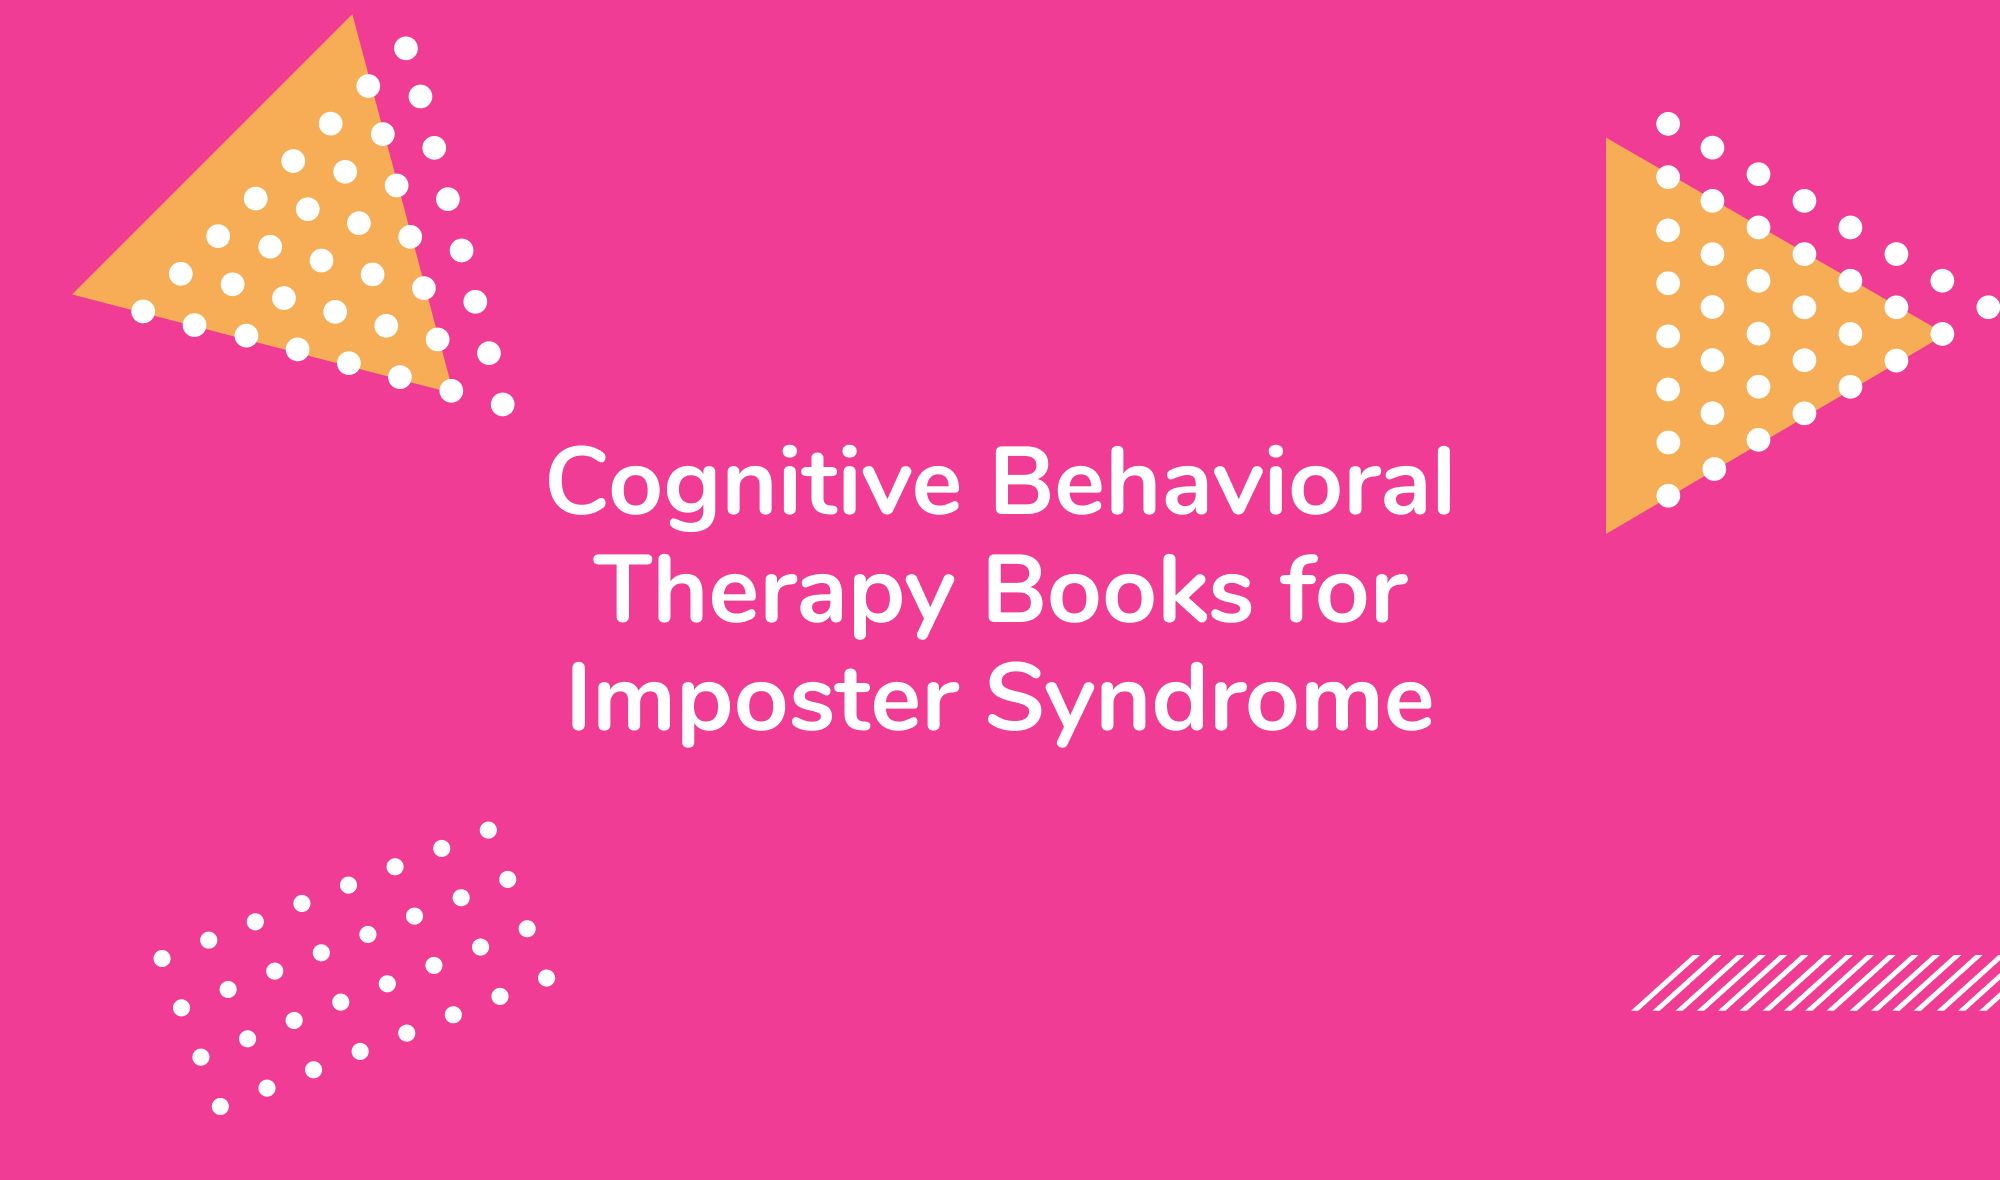 Cognitive Behavioral Therapy Books for Imposter Syndrome